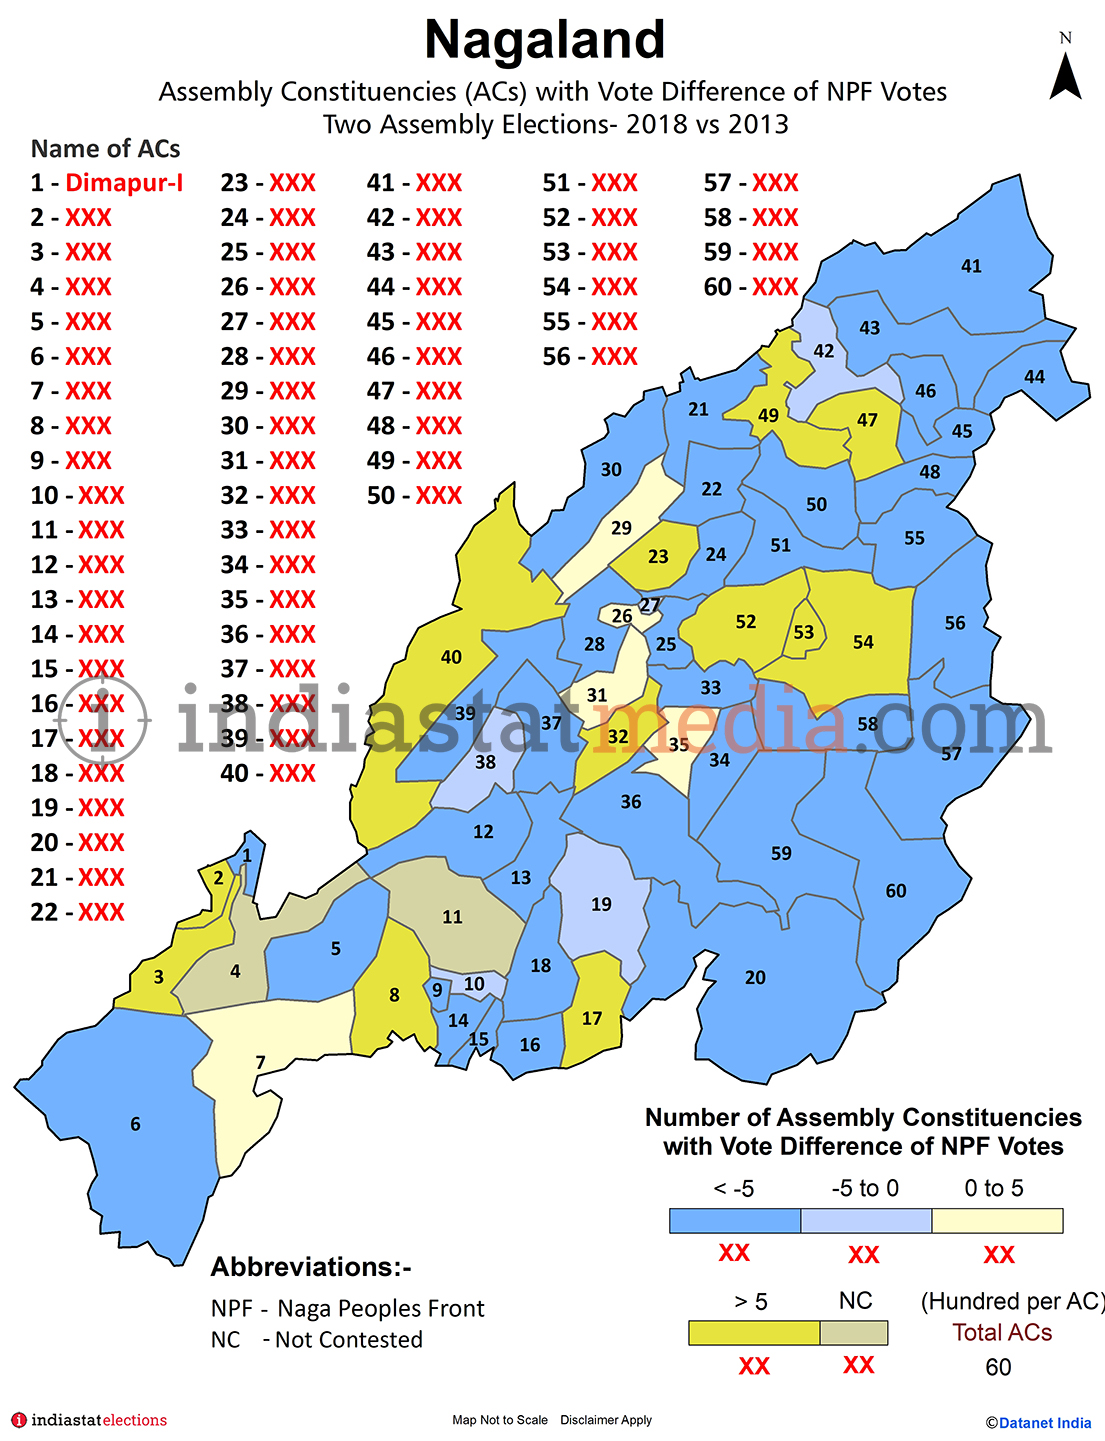 Assembly Constituencies with Vote Difference of NPF Votes in Nagaland (Assembly Election - 2013 & 2018)